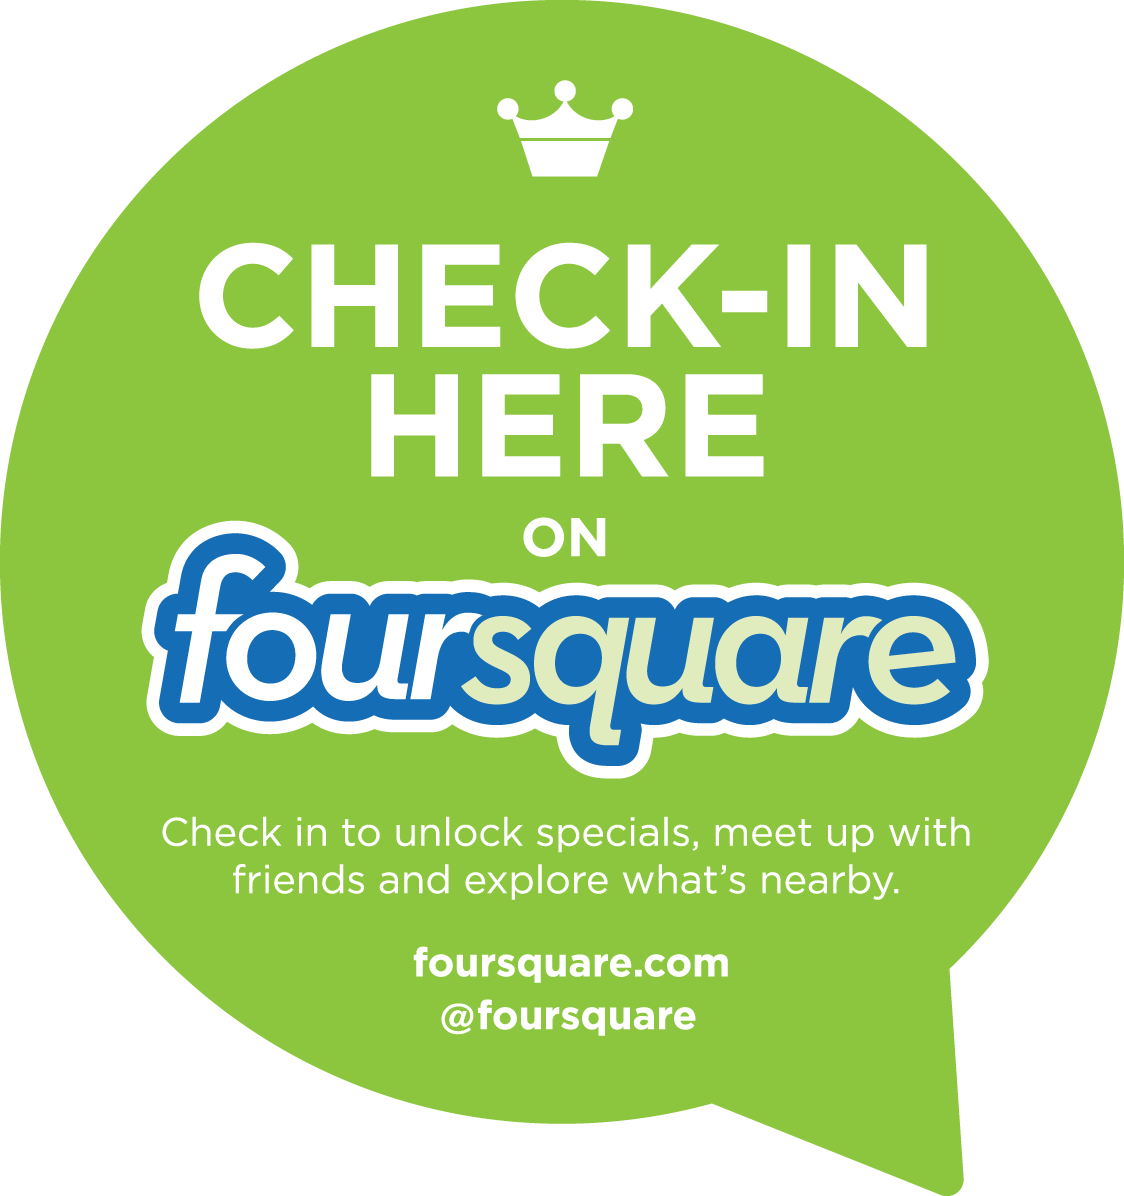 Geek insider, geekinsider, geekinsider. Com,, foursquare offering free movie tickets at comic con, news